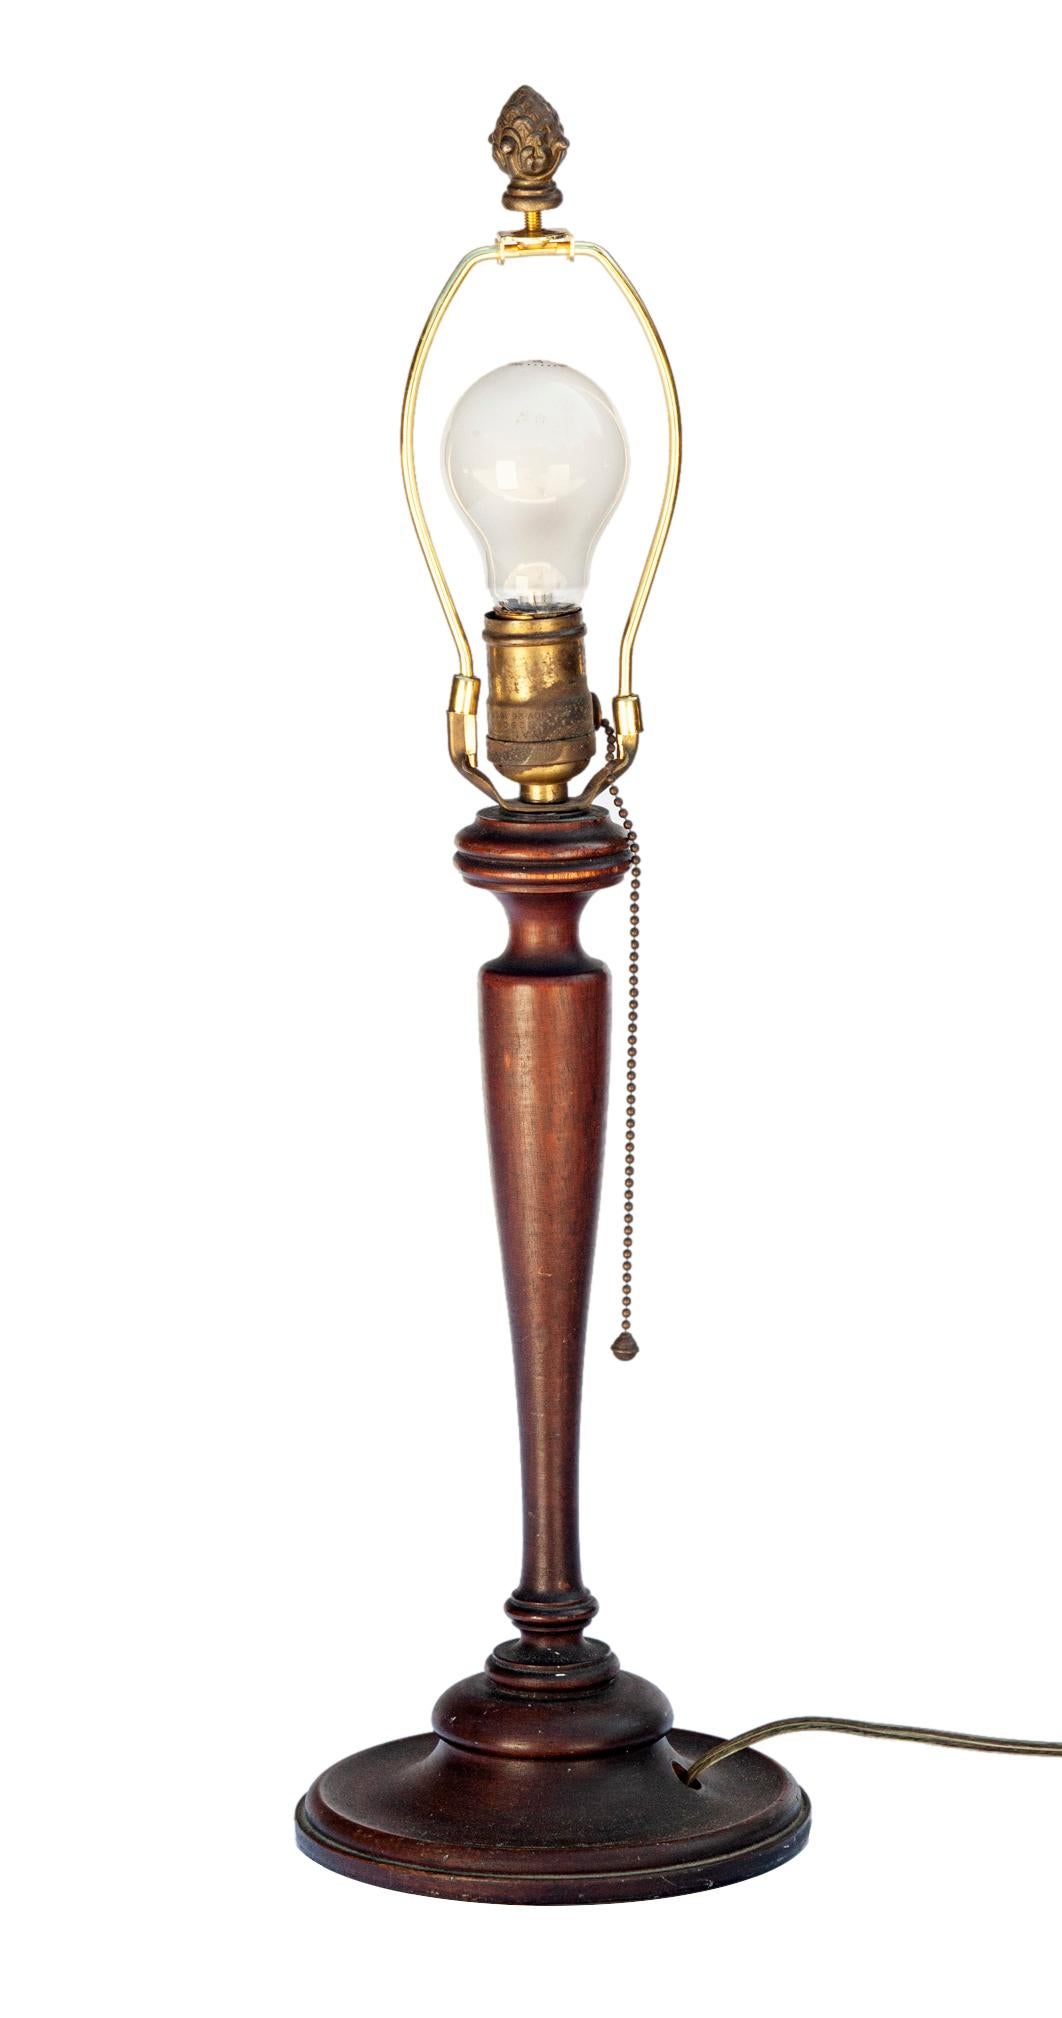 Vintage hand turned wood spool lamp. A table lamp in finely turned walnut with original finish. Original extra long brass pull chain, new silk shade by RH.
Designed and produced by an unknown studio craftsman.
Beautiful patina to the wood and brass.